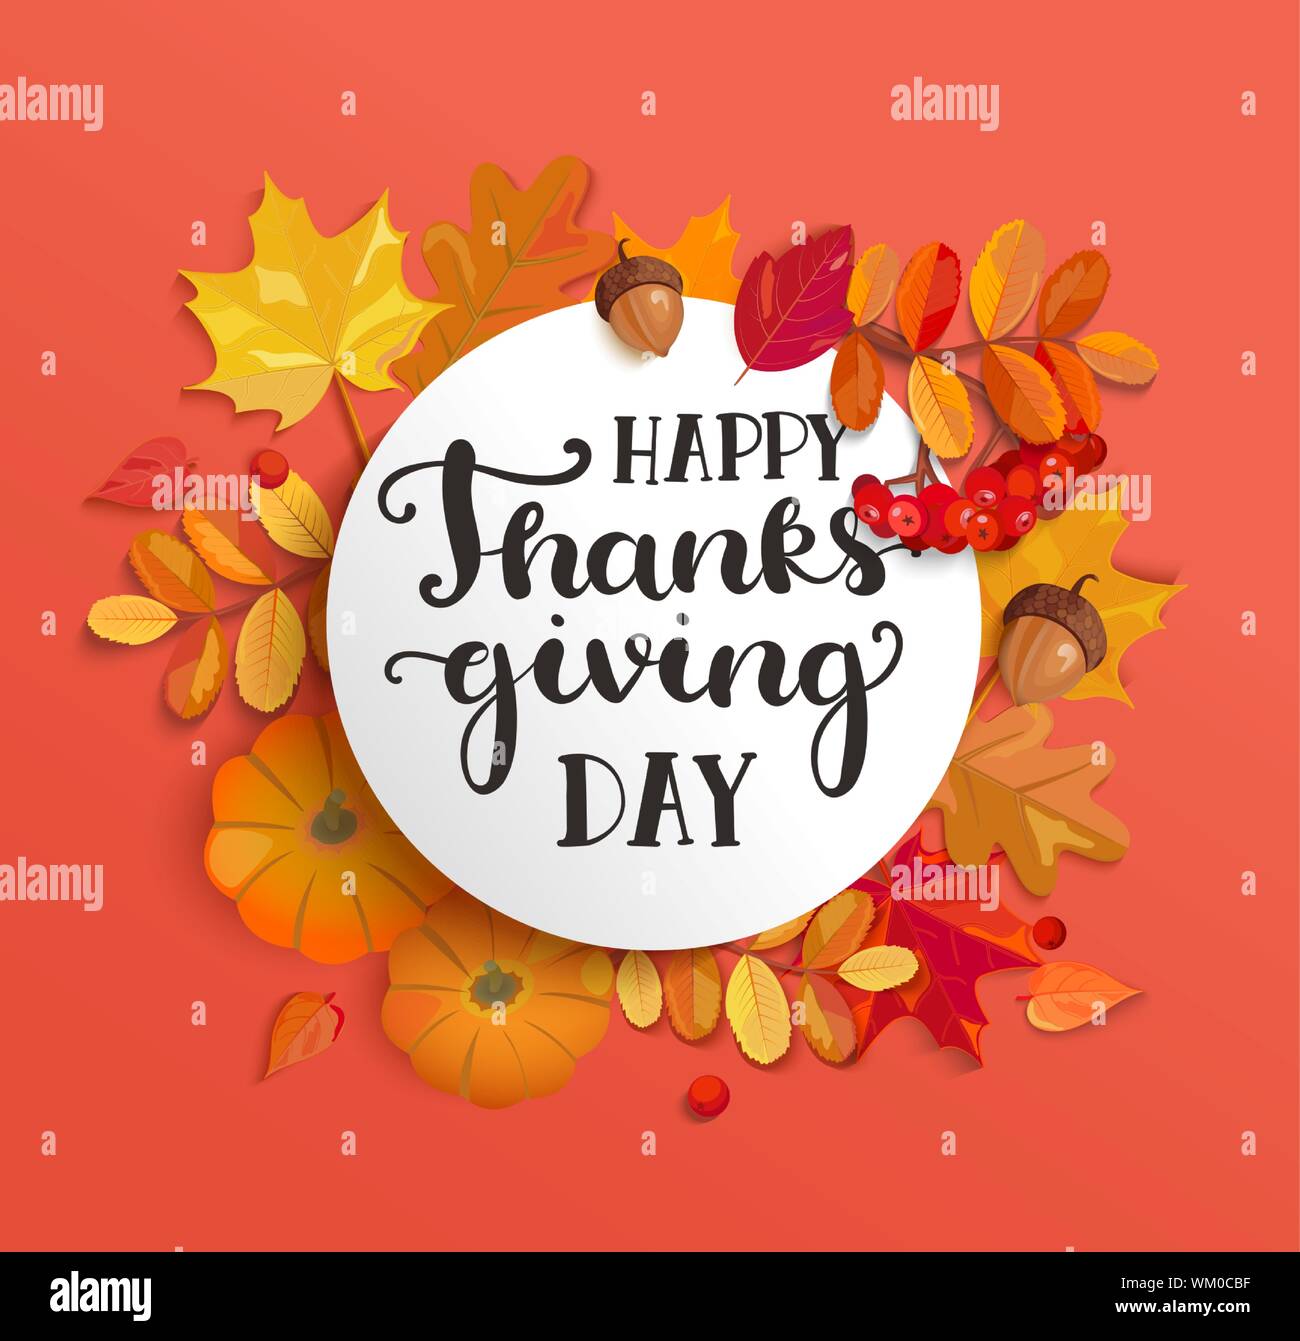 Banner for happy thanksgiving day celebration. Stock Vector